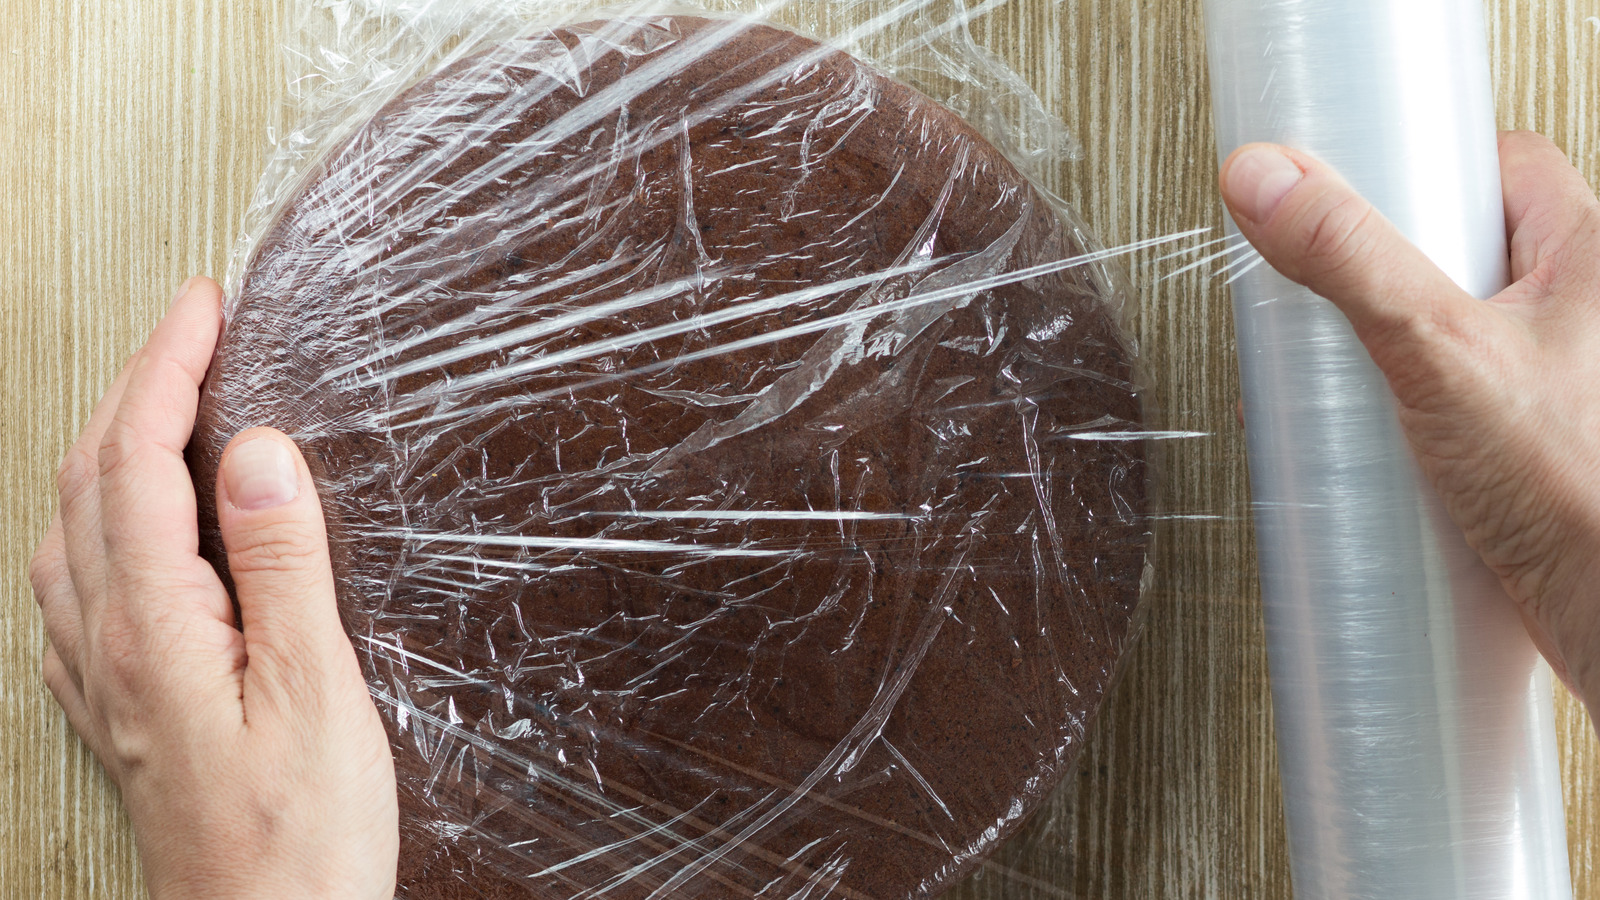 Why You Should Stop Using Plastic Wrap Immediately